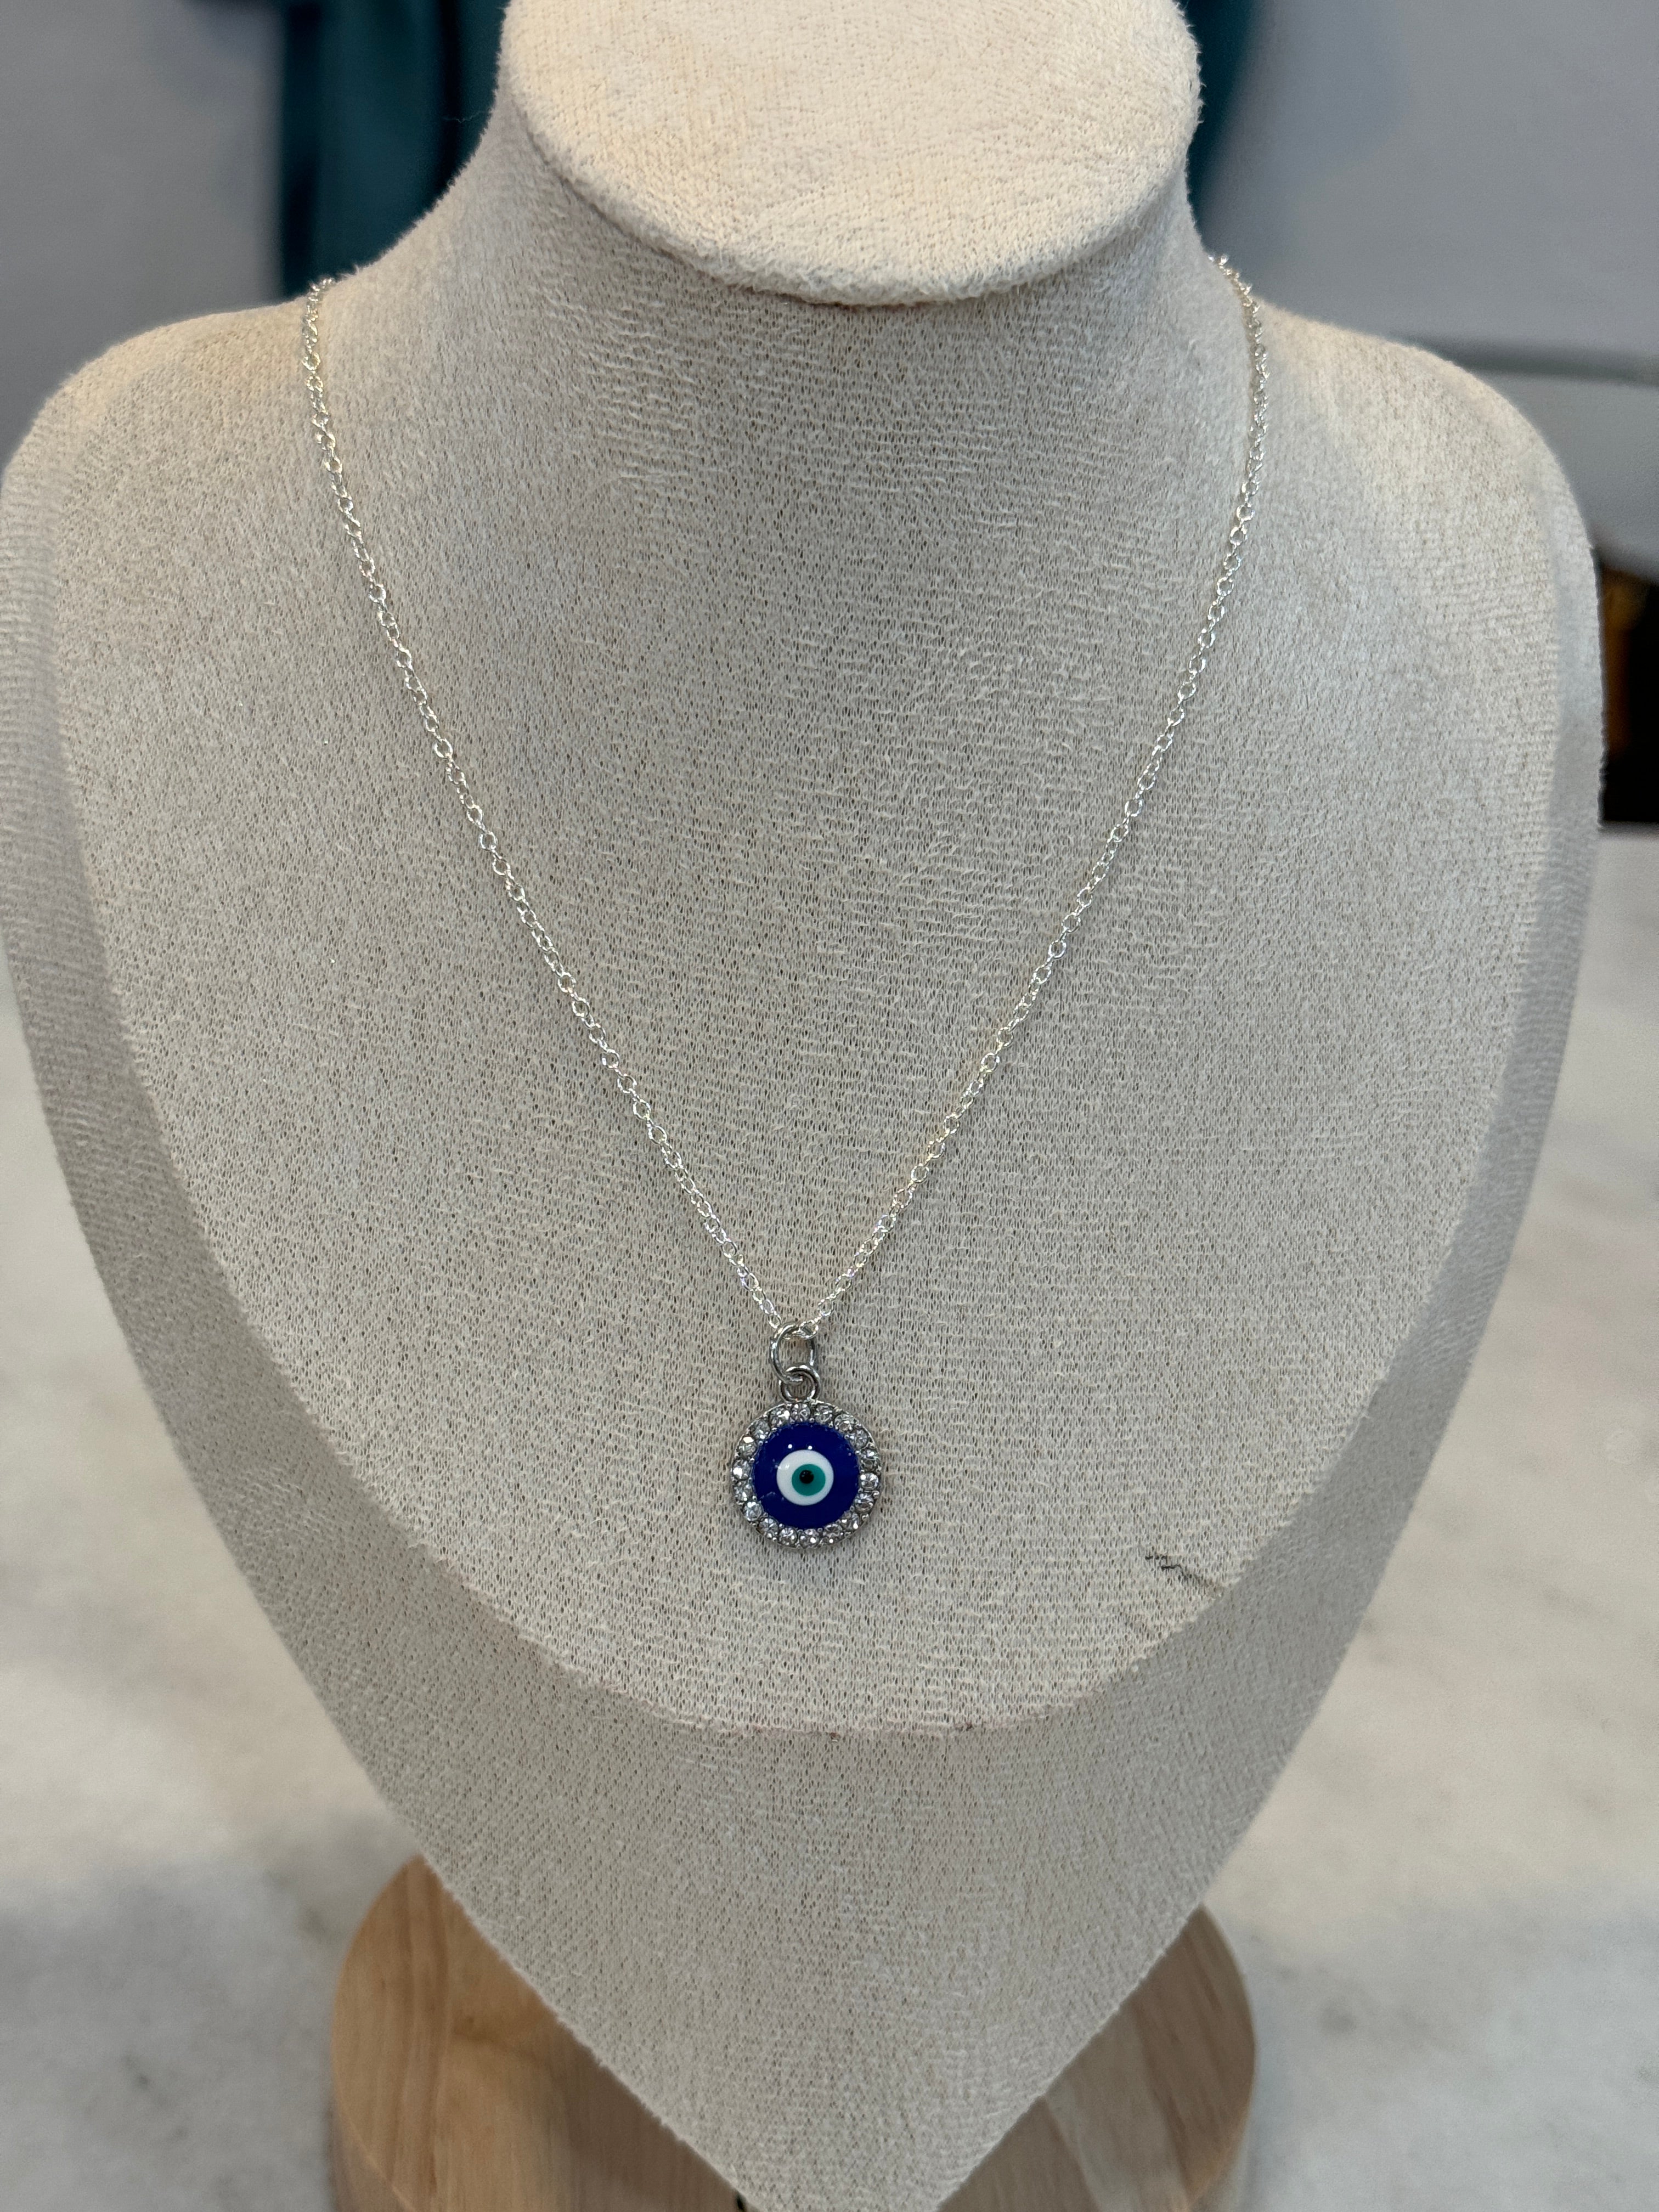 The Evil Eye Chain Necklace